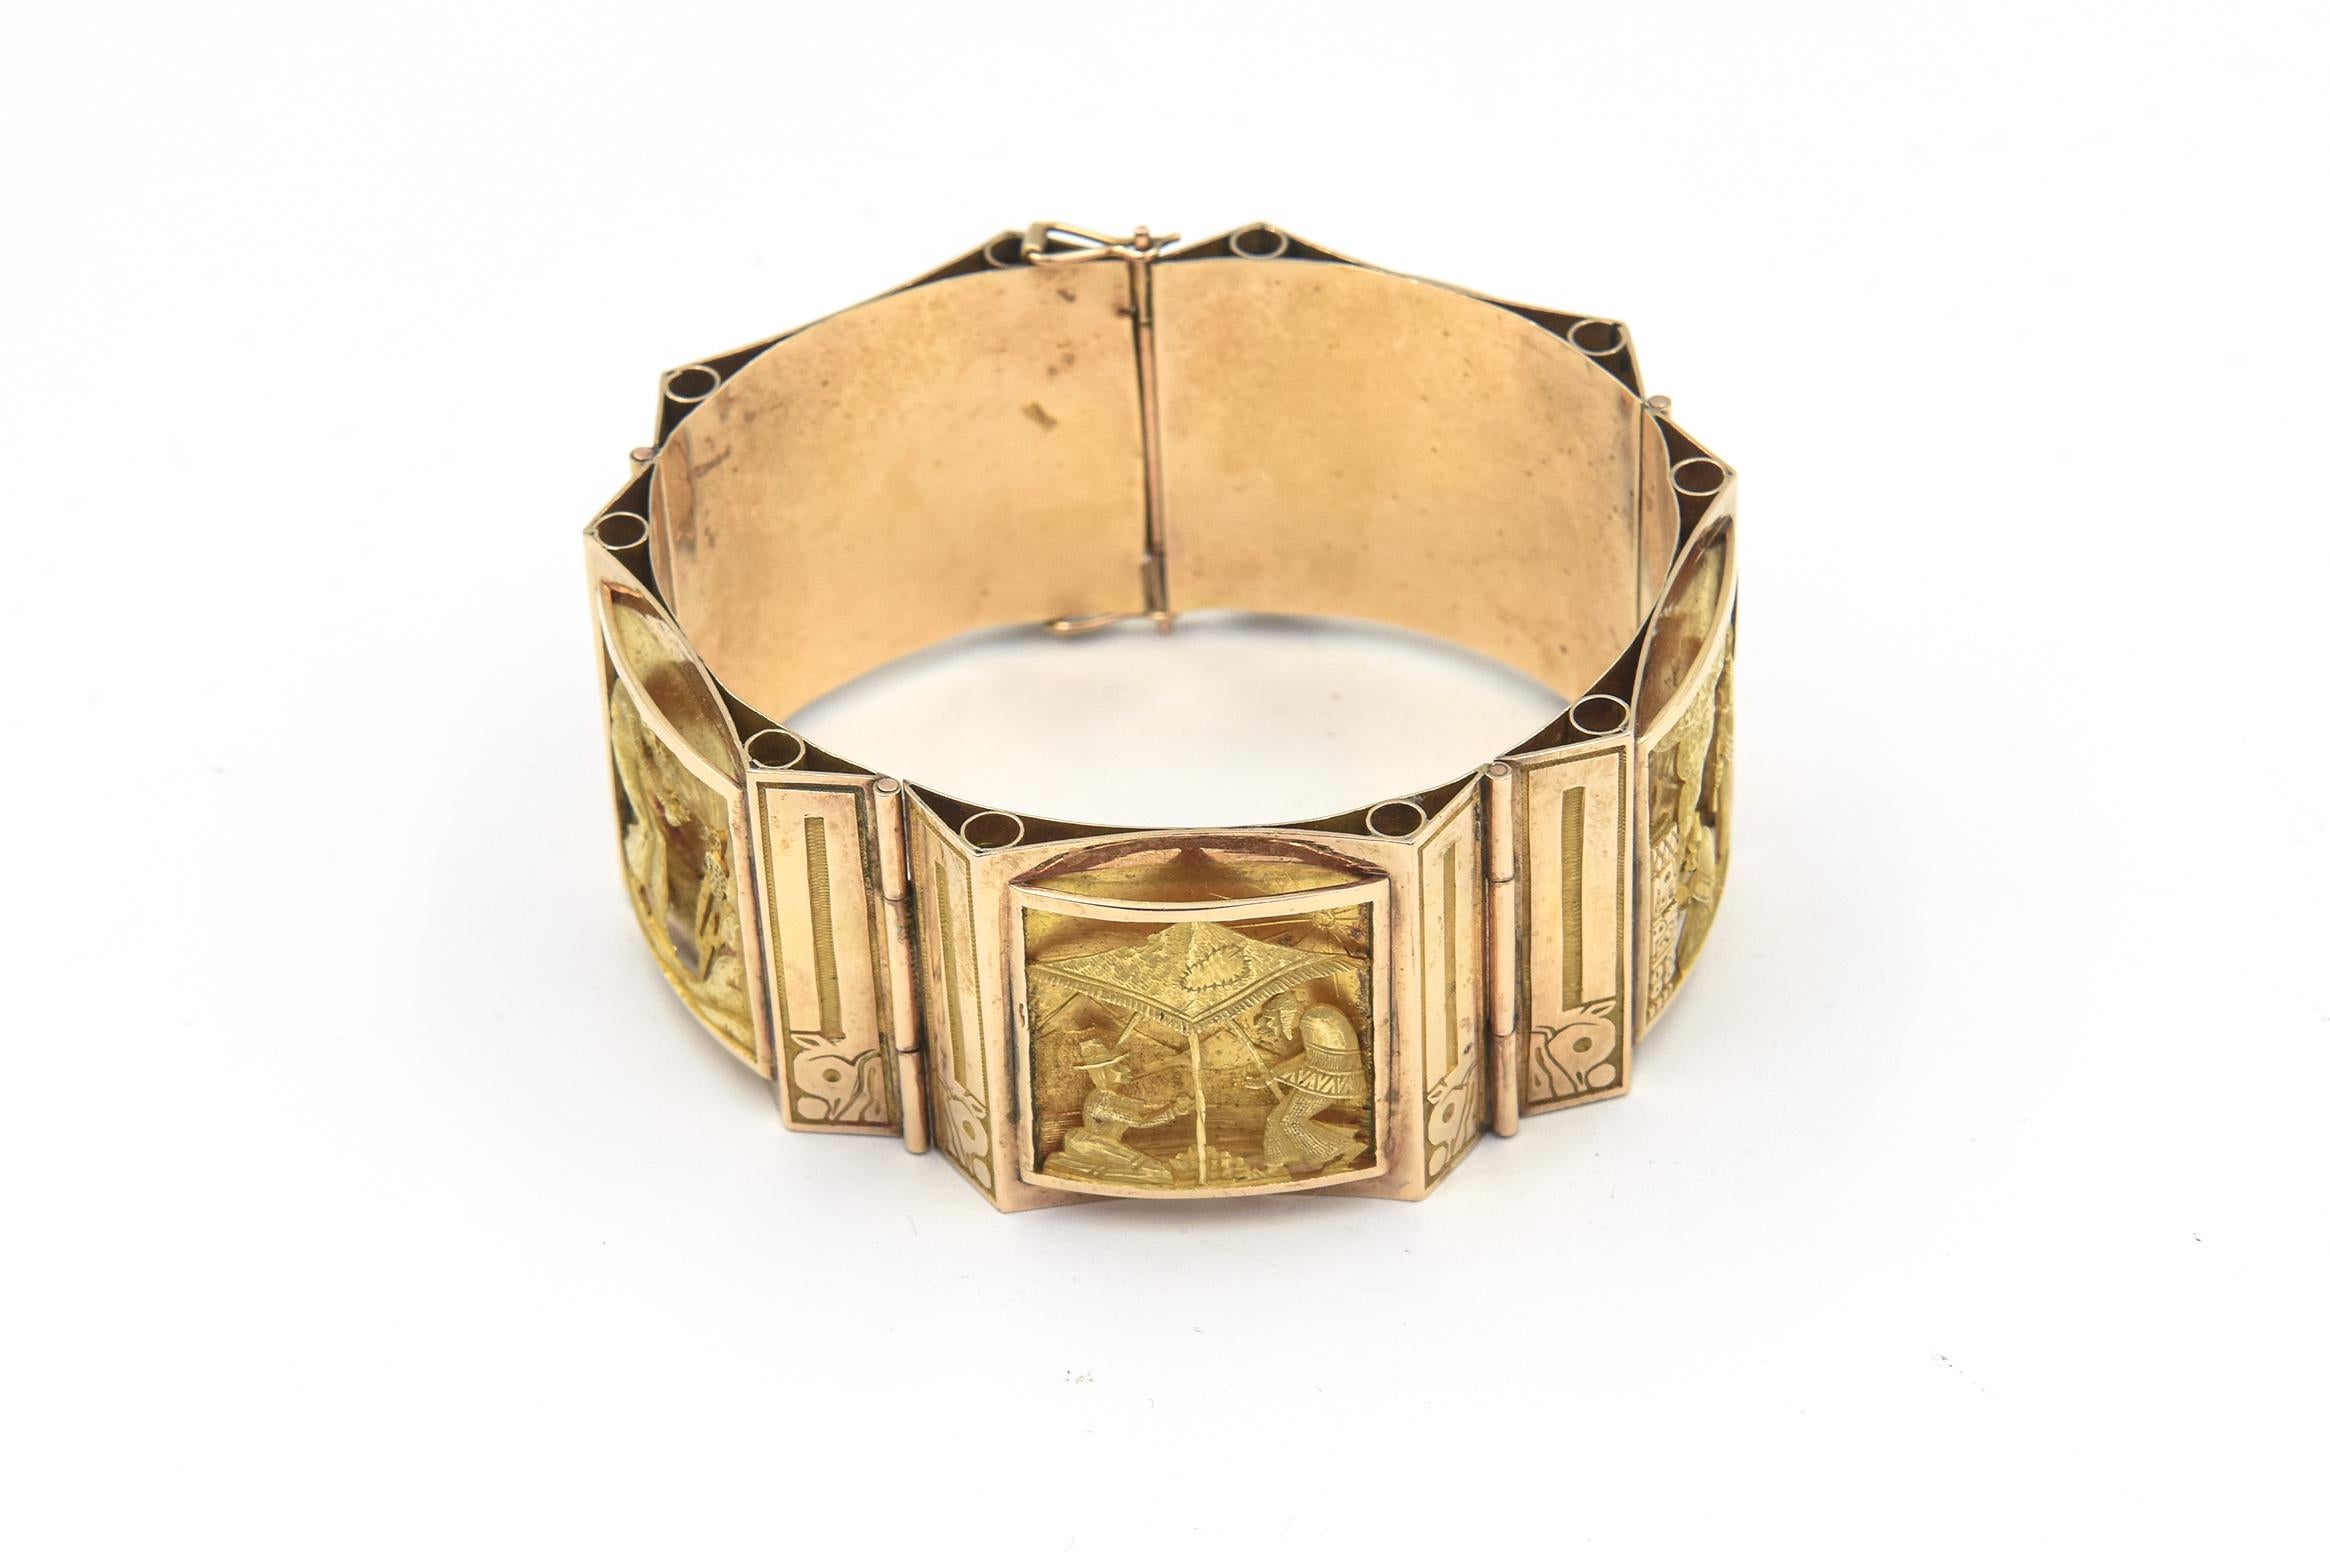 This highly detailed 18k yellow and rose gold bracelet features 5 ornate 3 dimensional plaques.  The workmanship on each scene is beautiful.  The bracelet tells a story through each scene.  On has a man sailing with the wind at his back,  The next